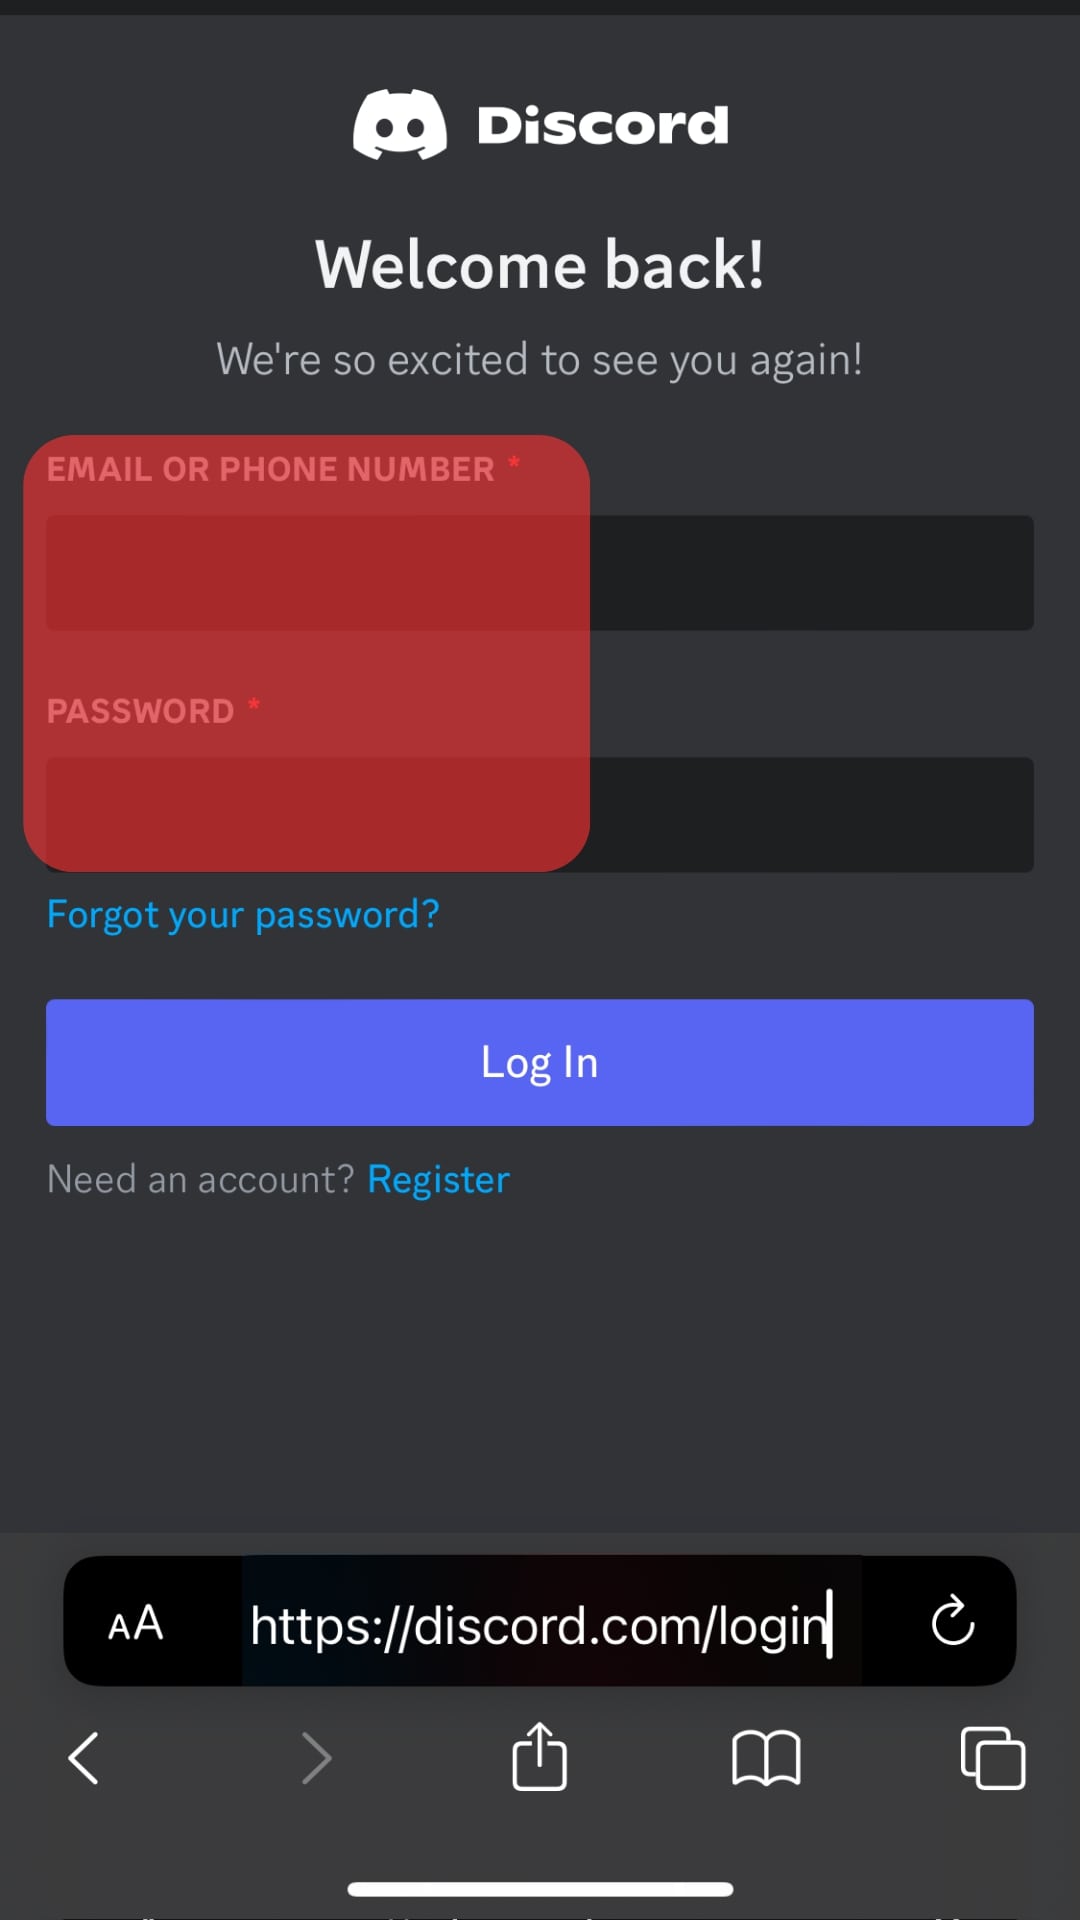 Enter The Discord Credentials To Log In